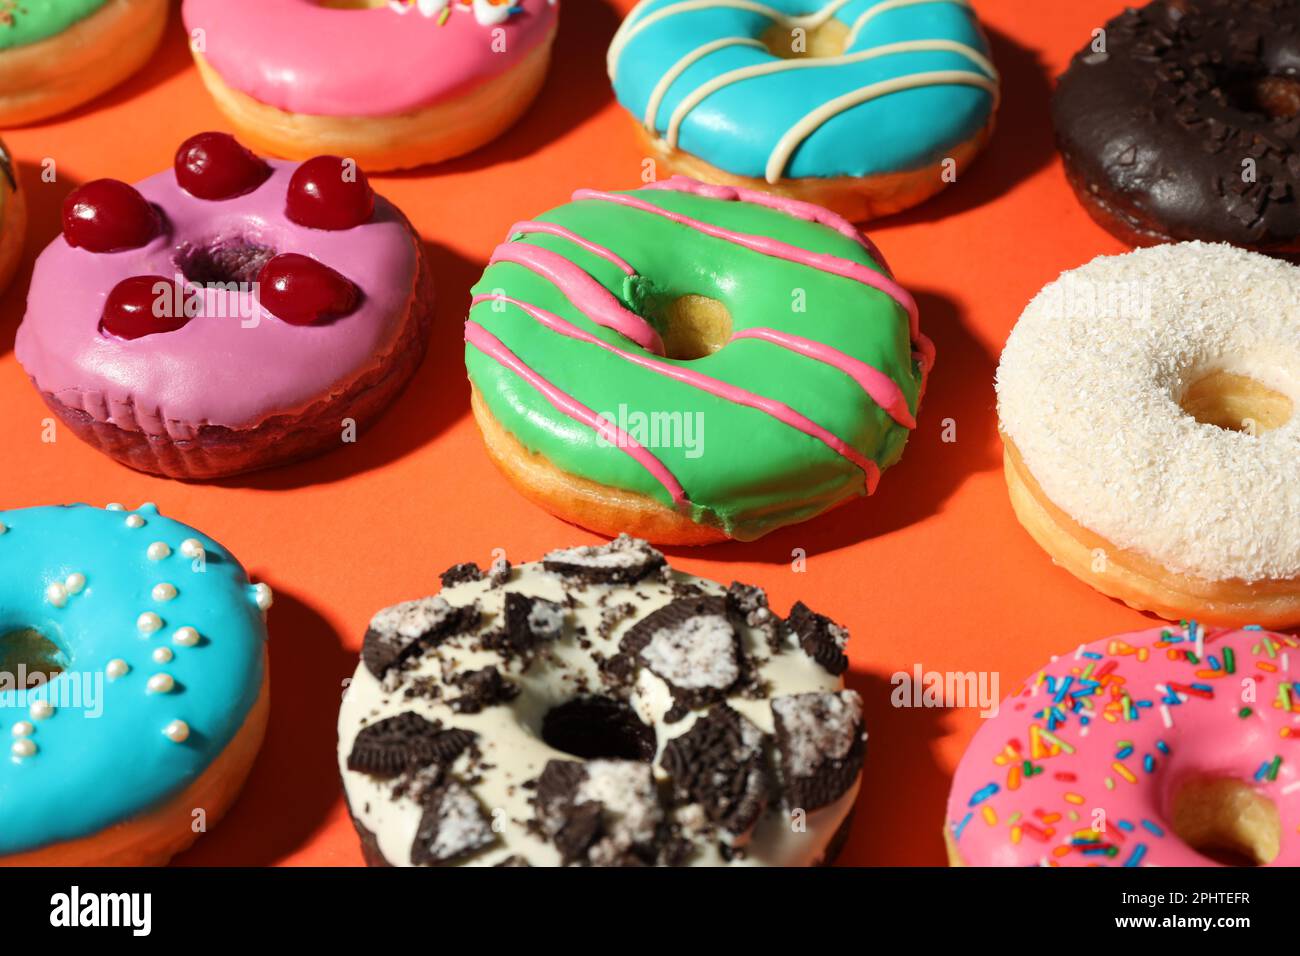 Sweet tasty glazed donuts on coral background Stock Photo